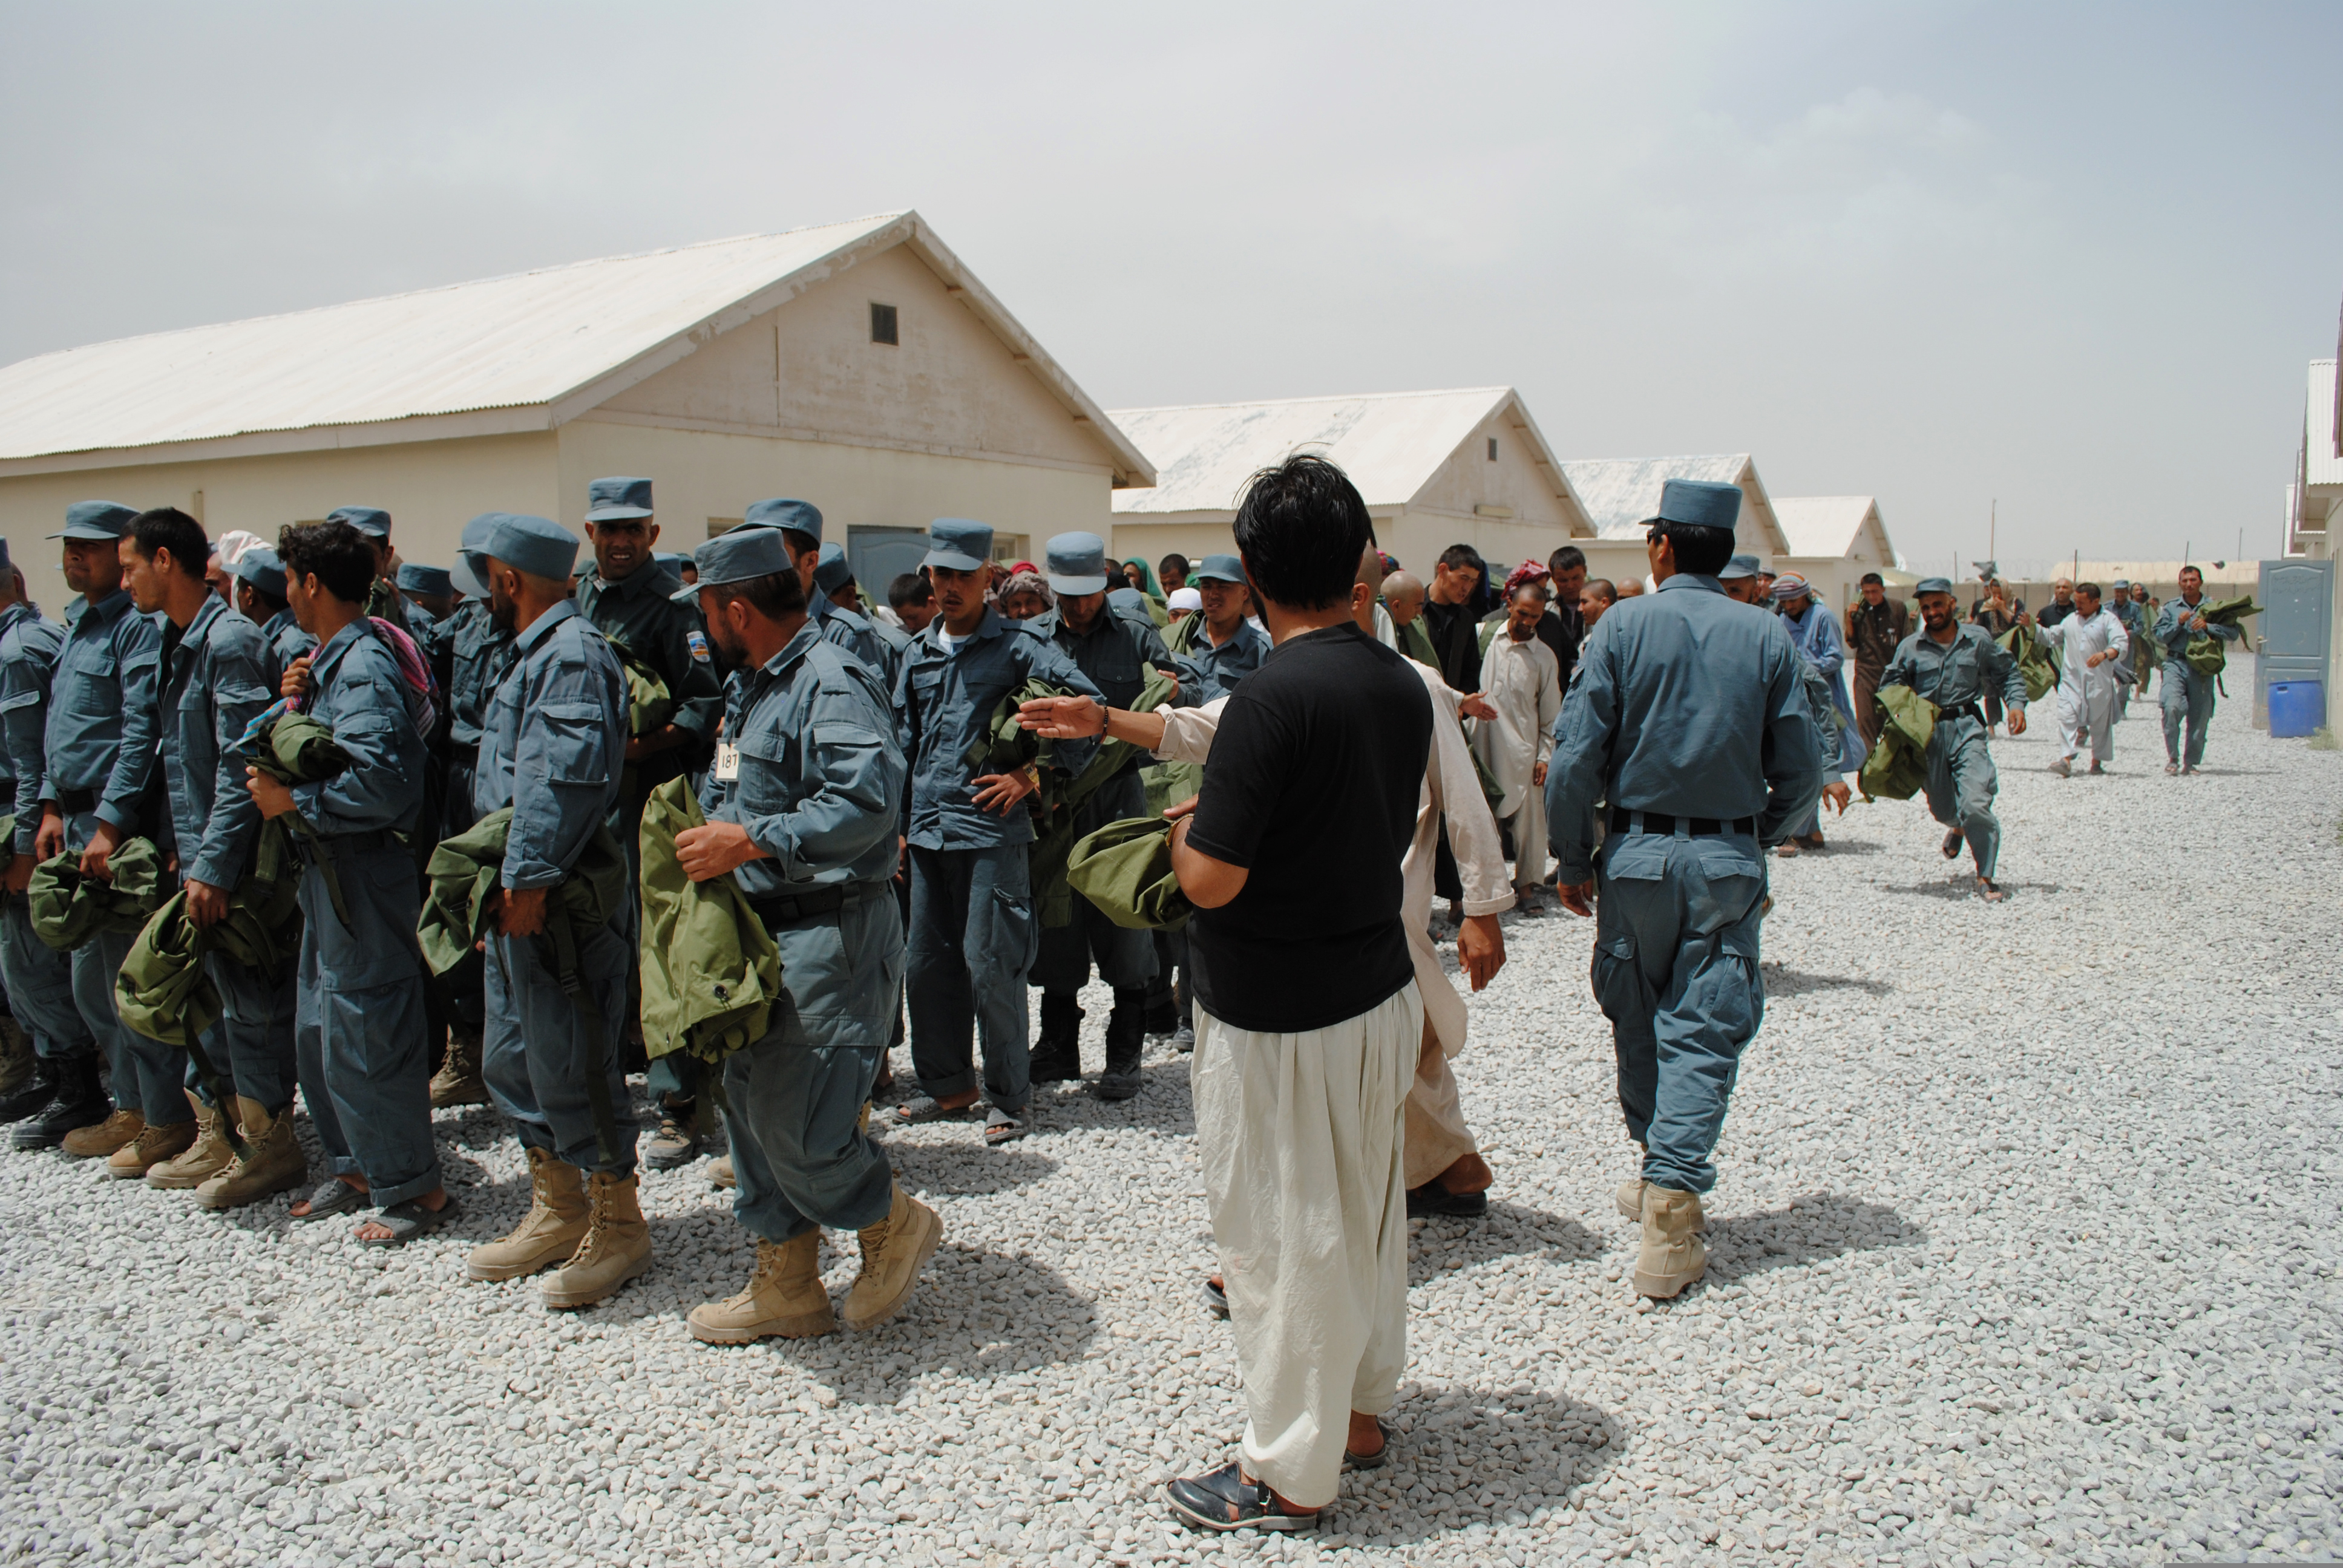 Recruits get ready to become members of the Afghan National Police force in Kandahar province. (DoD photo / TSgt Adrienne Brammer)